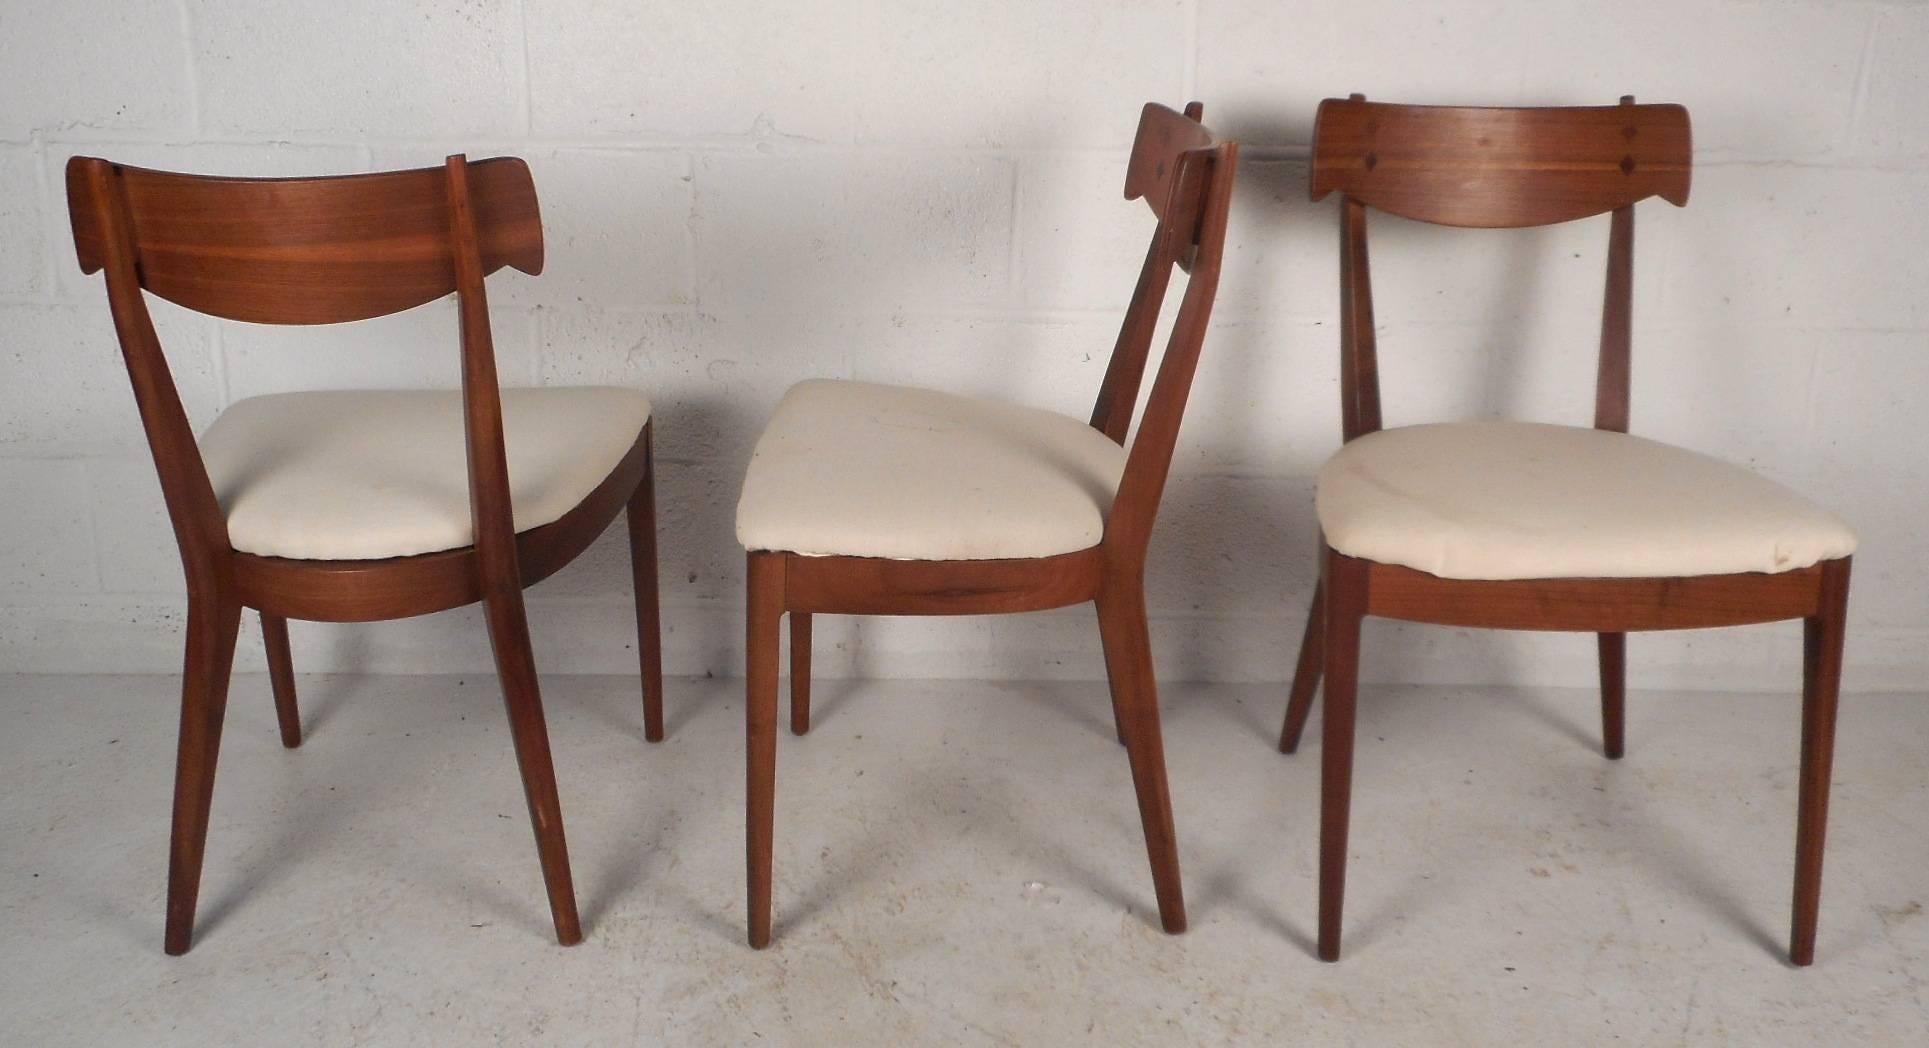 This beautiful set of four vintage modern dining chairs by Kipp Stewart for Drexel make an impression in any setting. Sleek design has sculpted back rests with rosewood diamond shaped inlays and unusual splayed back legs. Plush white upholstered